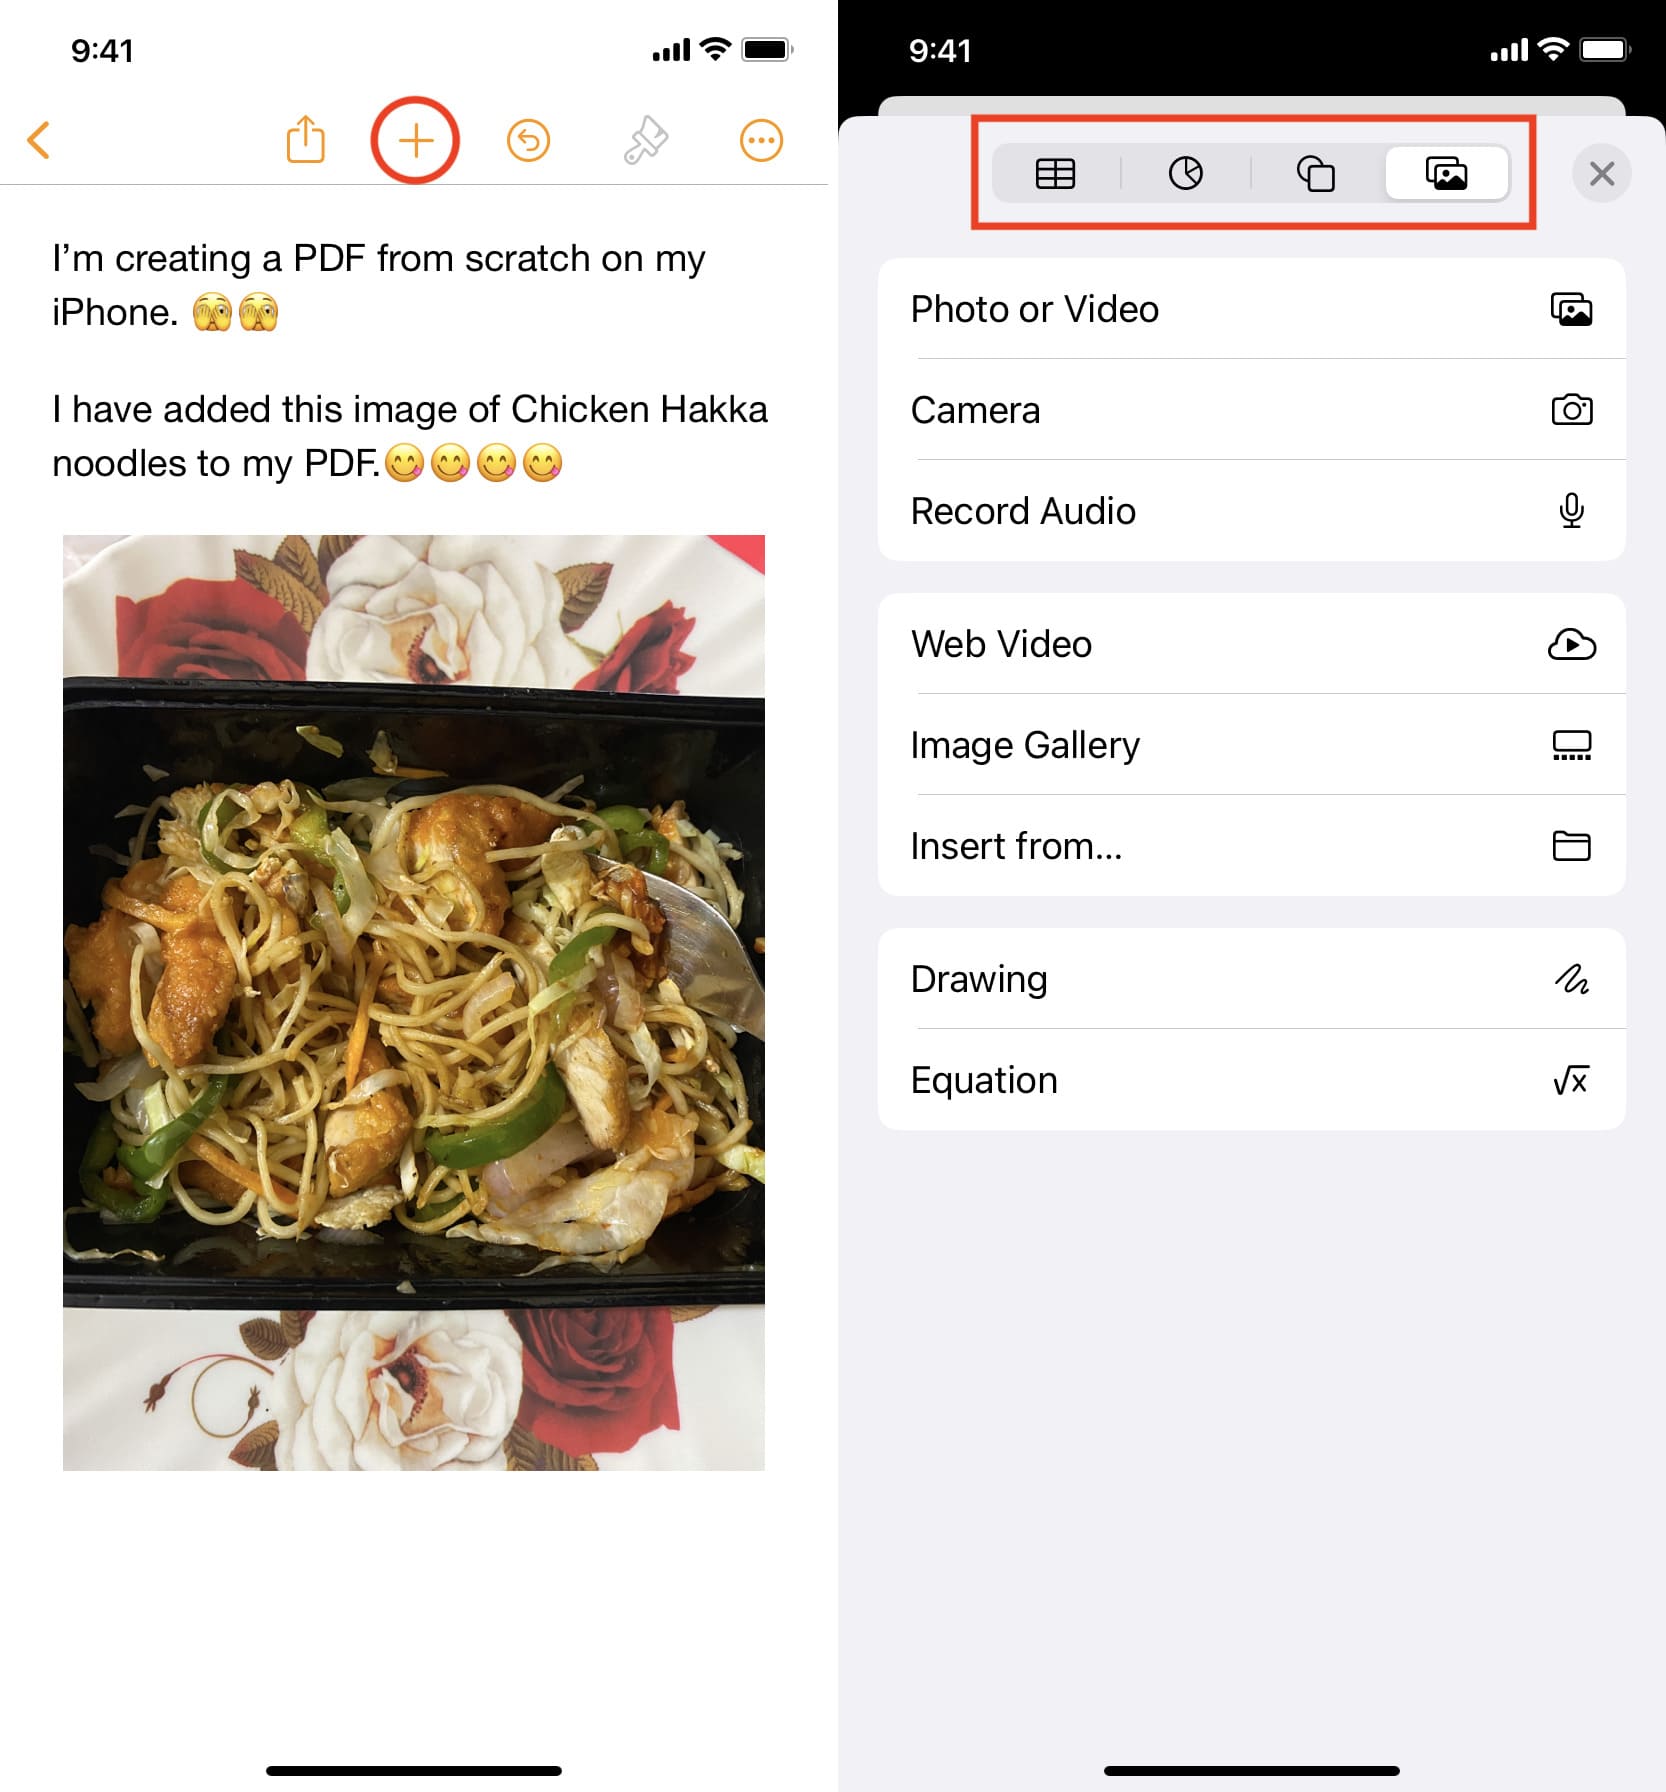 Enter text, images and other things to PDF on iPhone